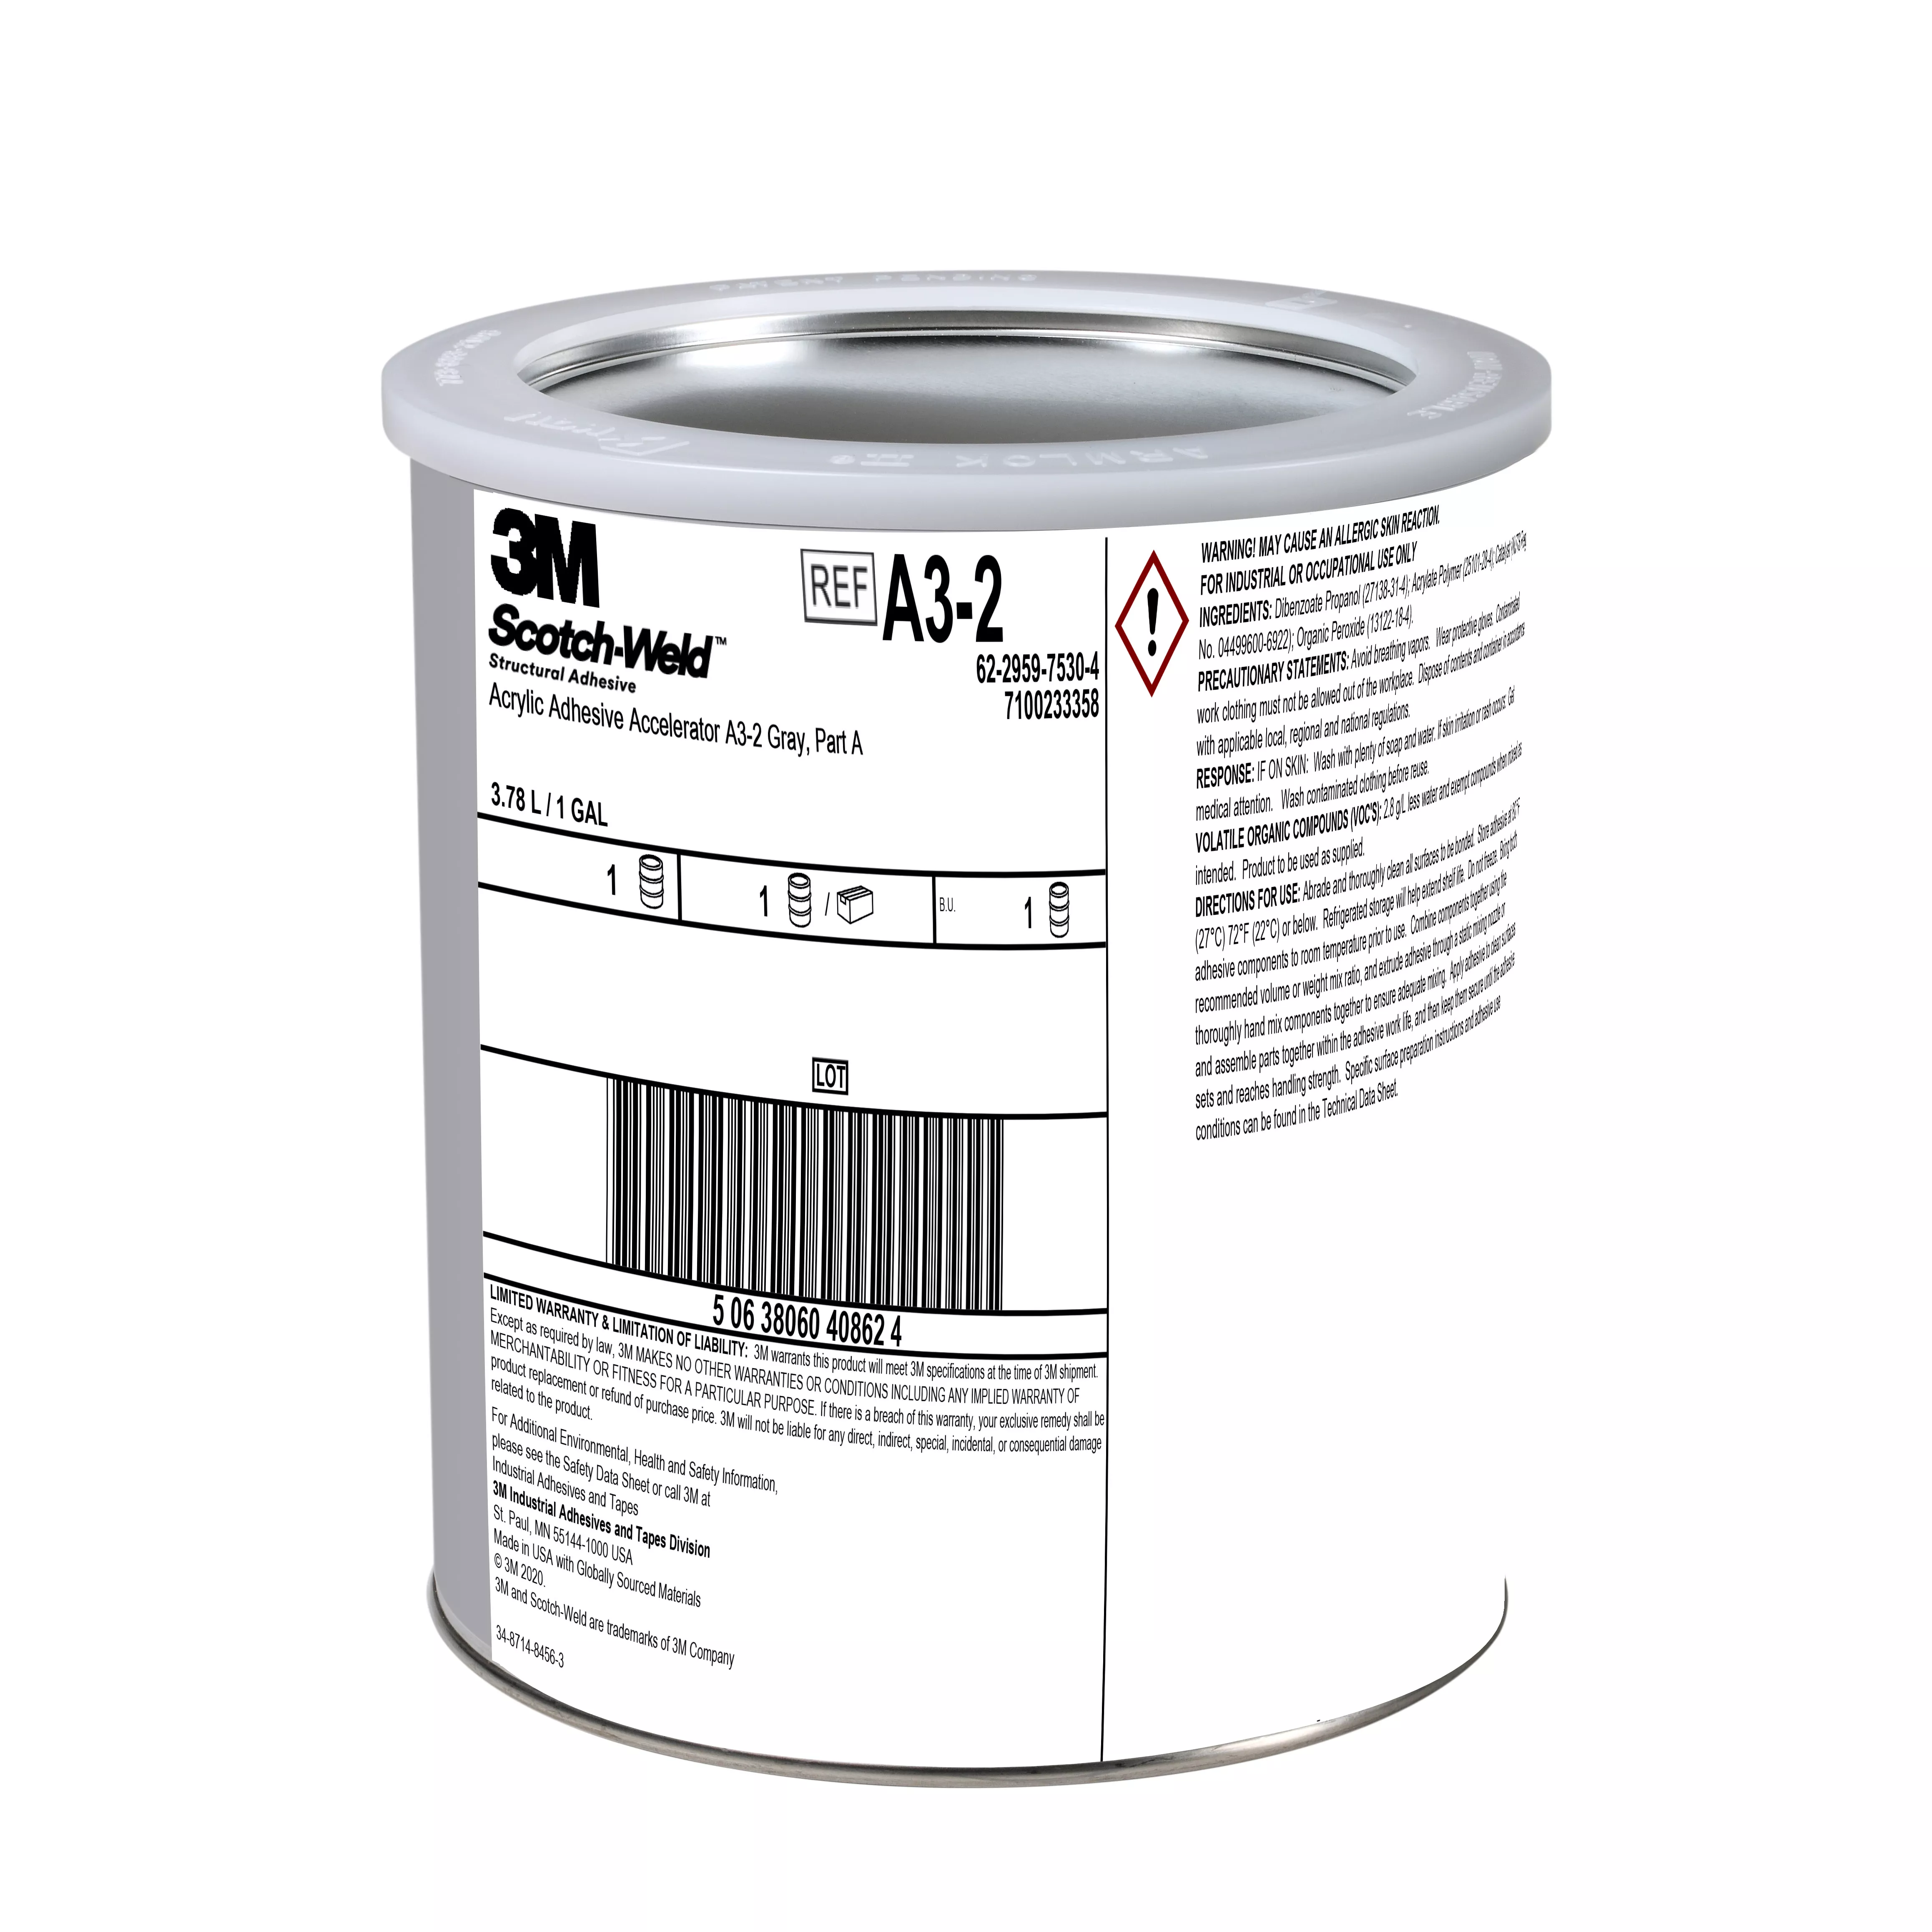 3M™ Scotch-Weld™ Acrylic Adhesive Accelerator A3-2, Gray, Part A, 1
Gallon, 1 Can/Case